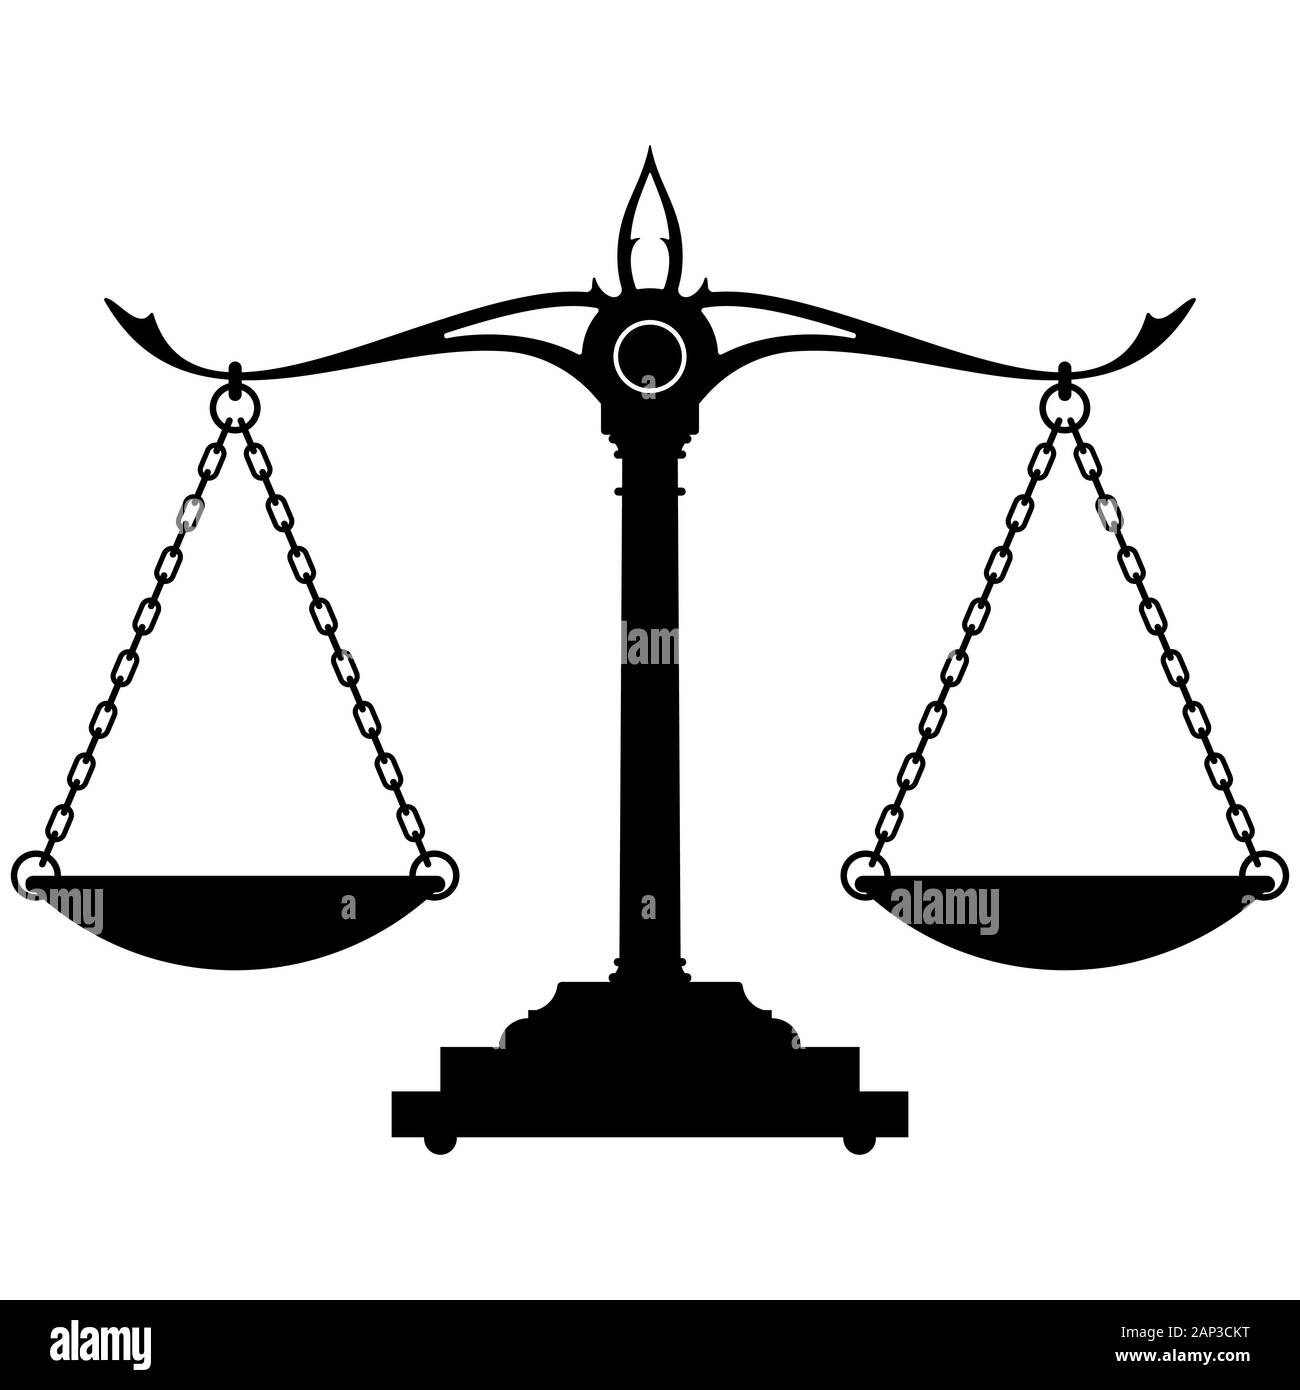 Scales of justice silhouette vector illustration isolated Stock Vector